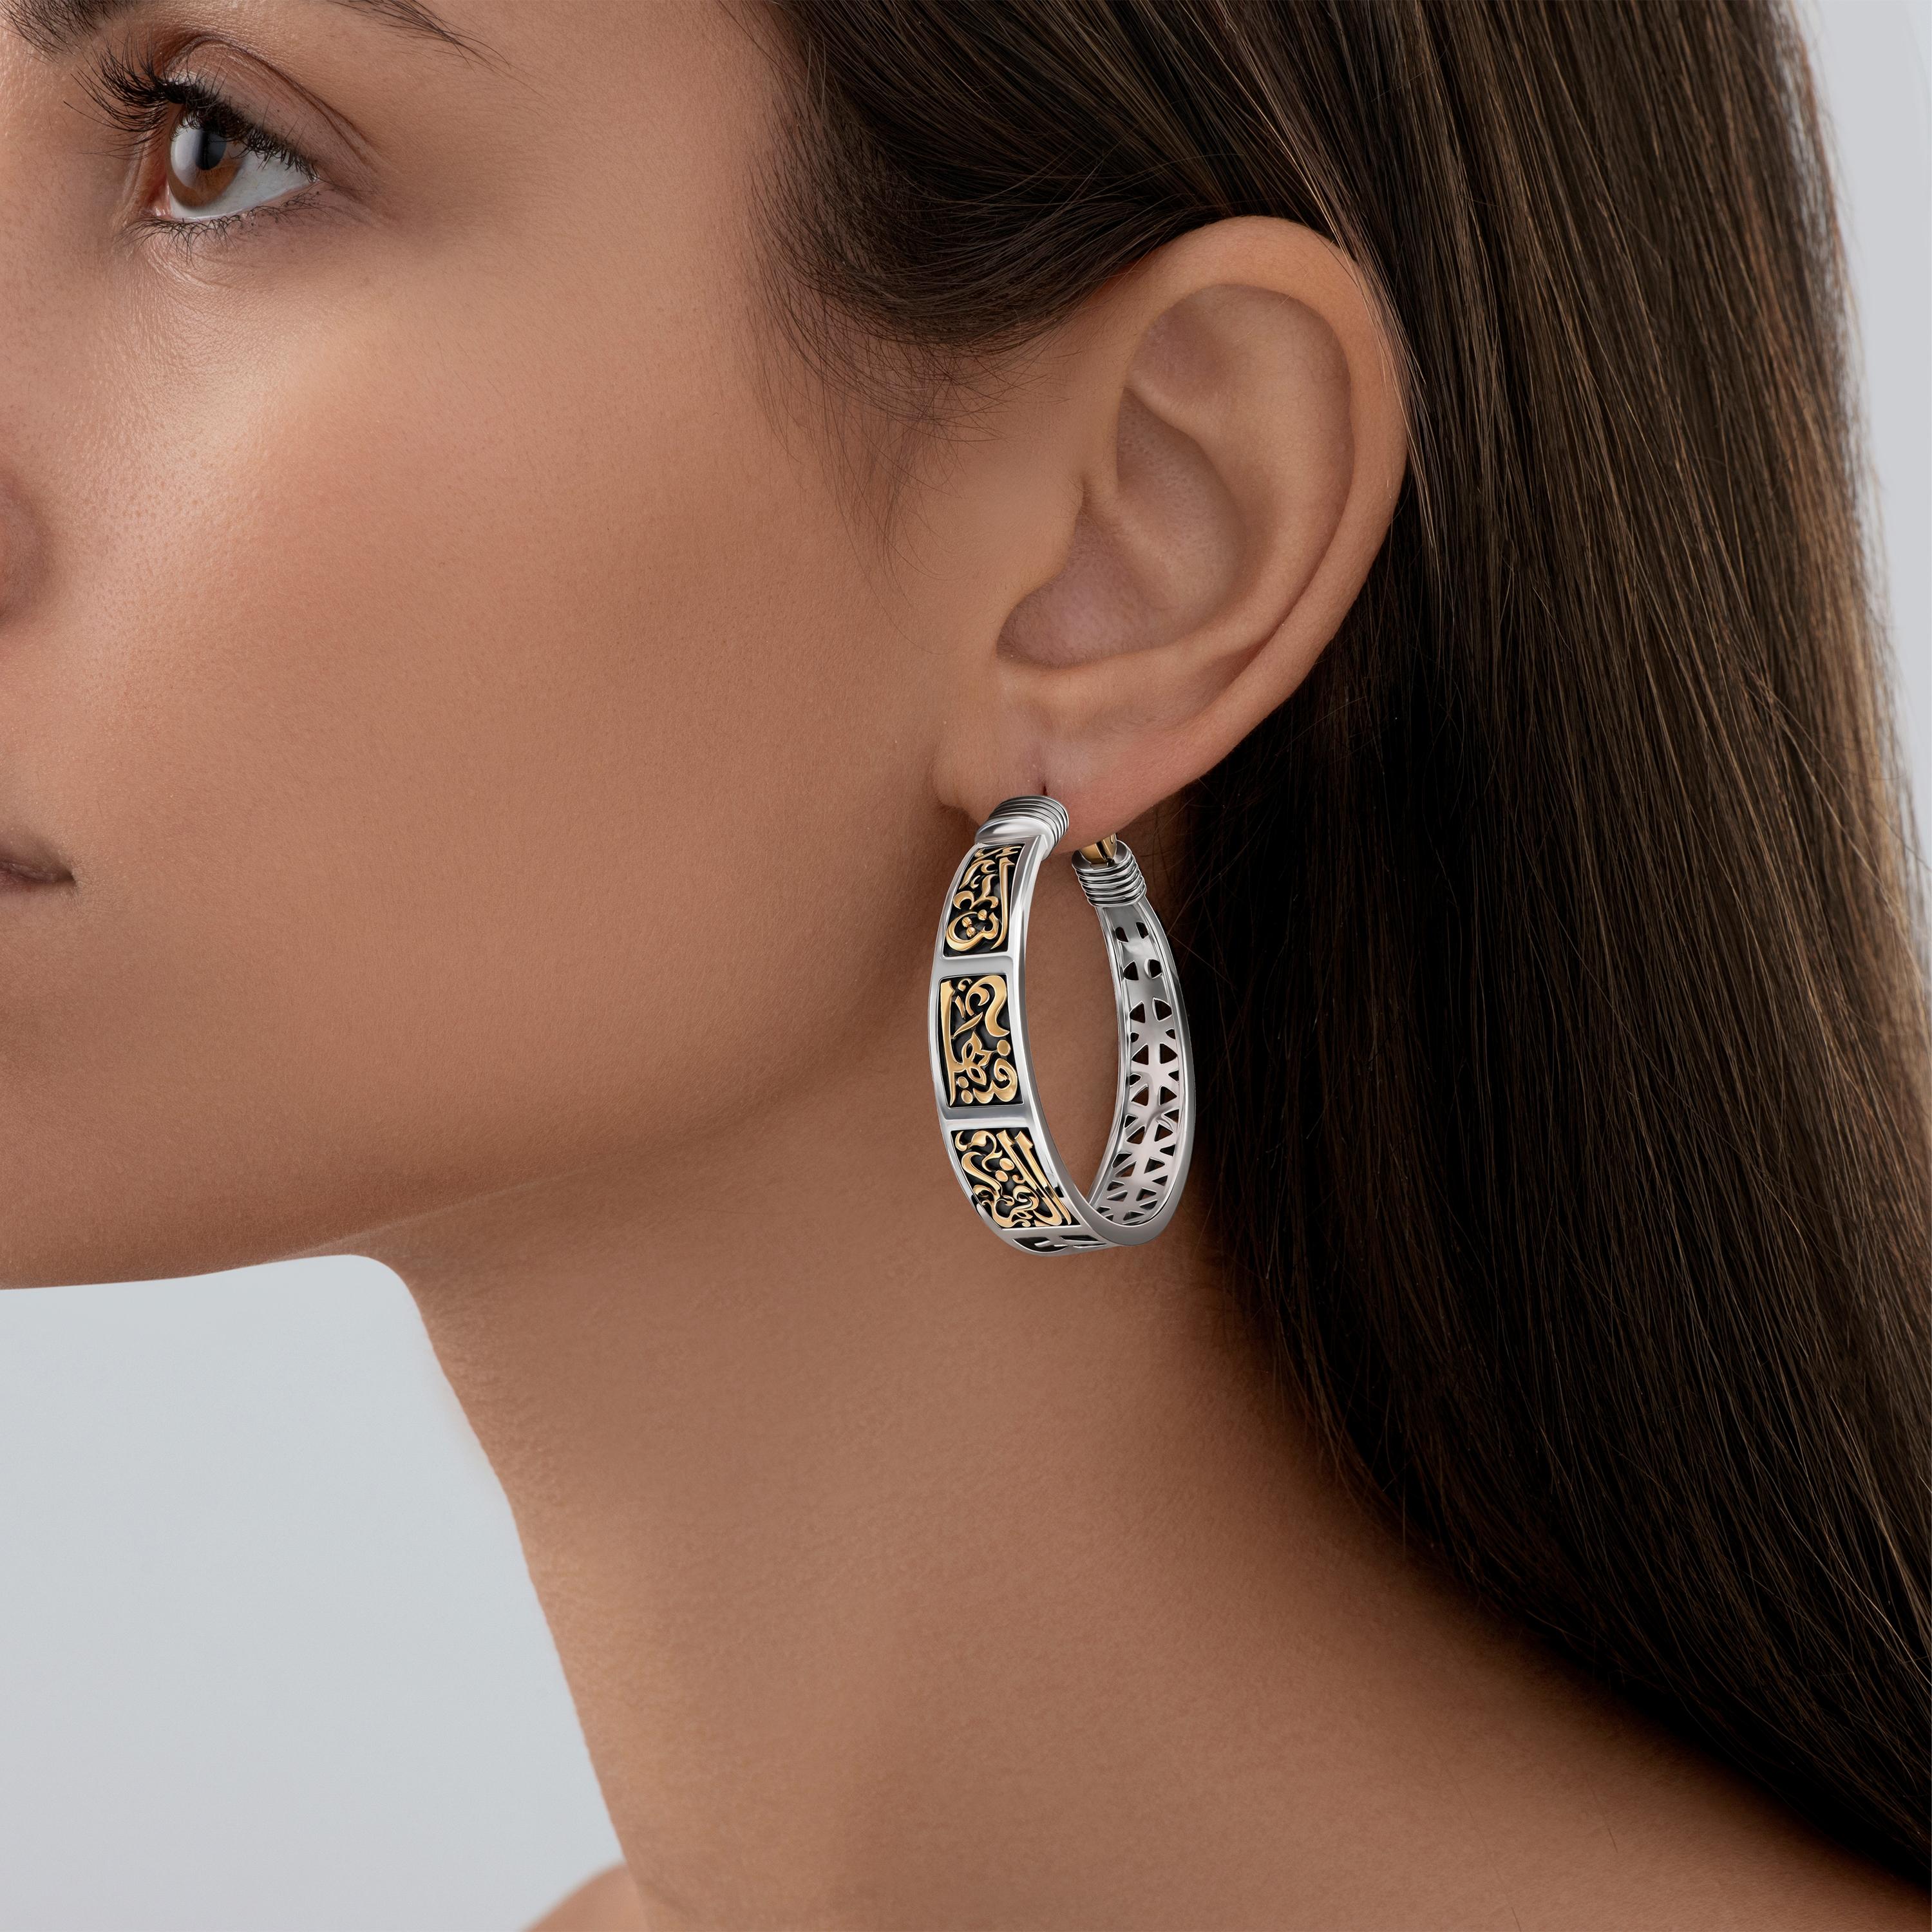 18 Karat Gold and Sterling Silver Classic Hoop Earrings adorned with Azza Fahmy's signature Arabic Calligraphy. 

The perfect Classic Hoop Earrings in 18 Karat Gold and Sterling Silver are engraved with Mamluk motifs on the back and are inscribed on